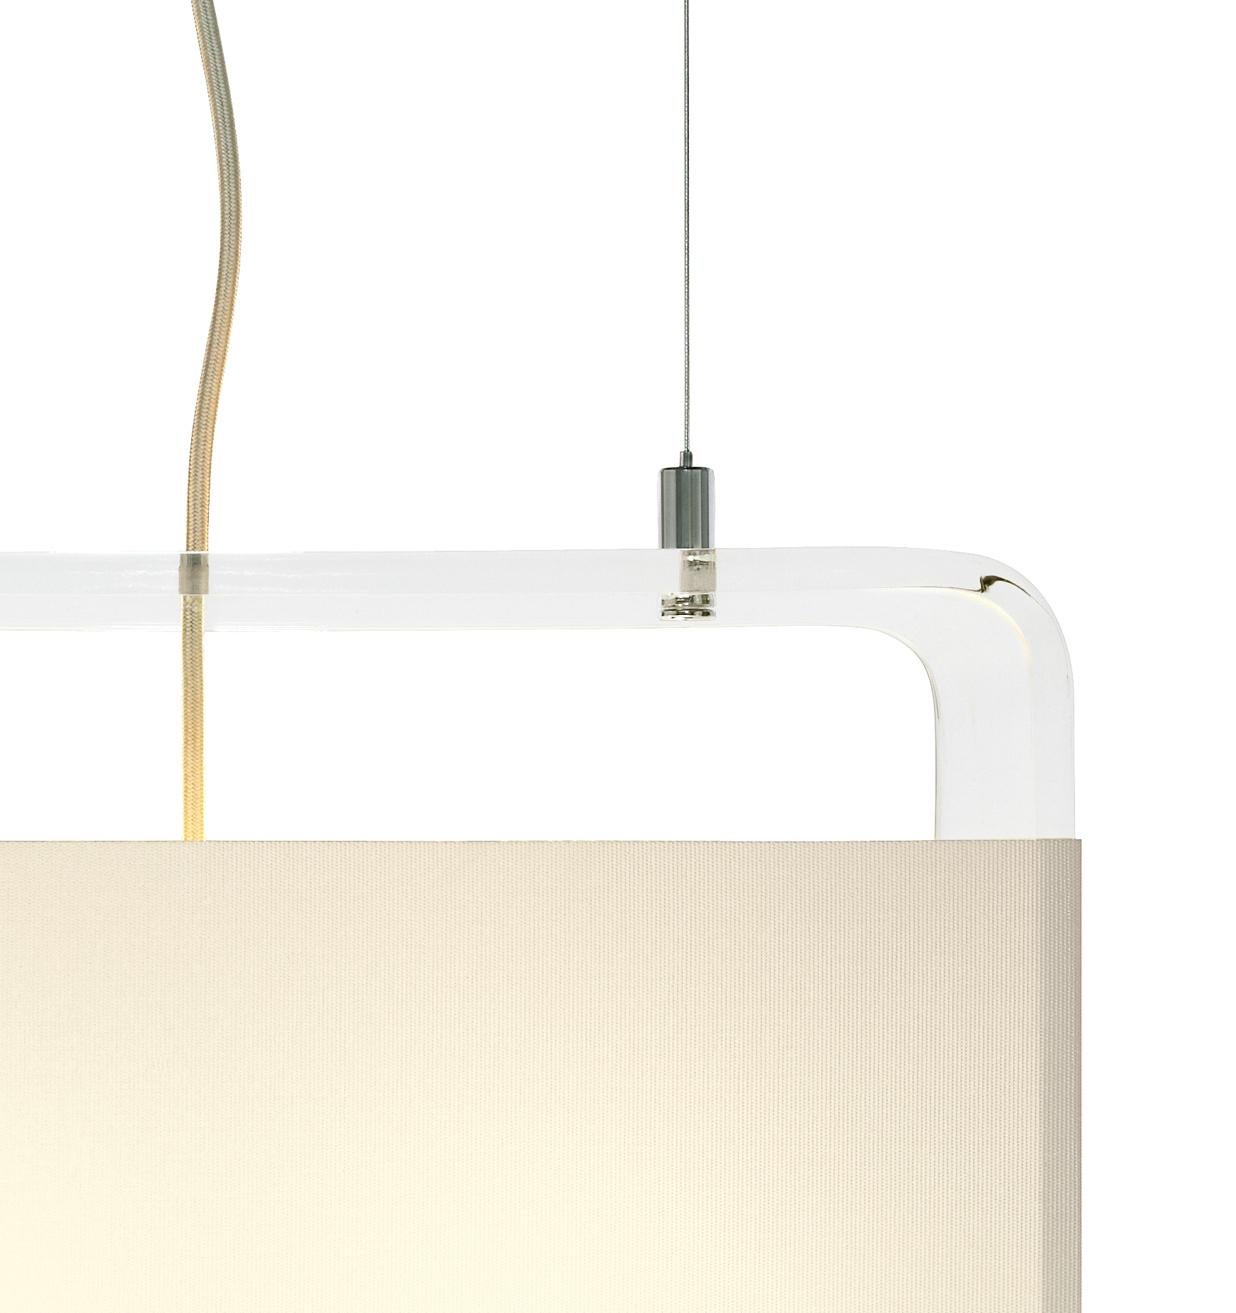 Tube Top is newly reborn as a suspension lamp, fusing its brilliant transparent acrylic surfaces with a soft and diffused fabric shade held in tension. Tube Top pendant is a minimalist statement in form and proportion providing remarkable and fully